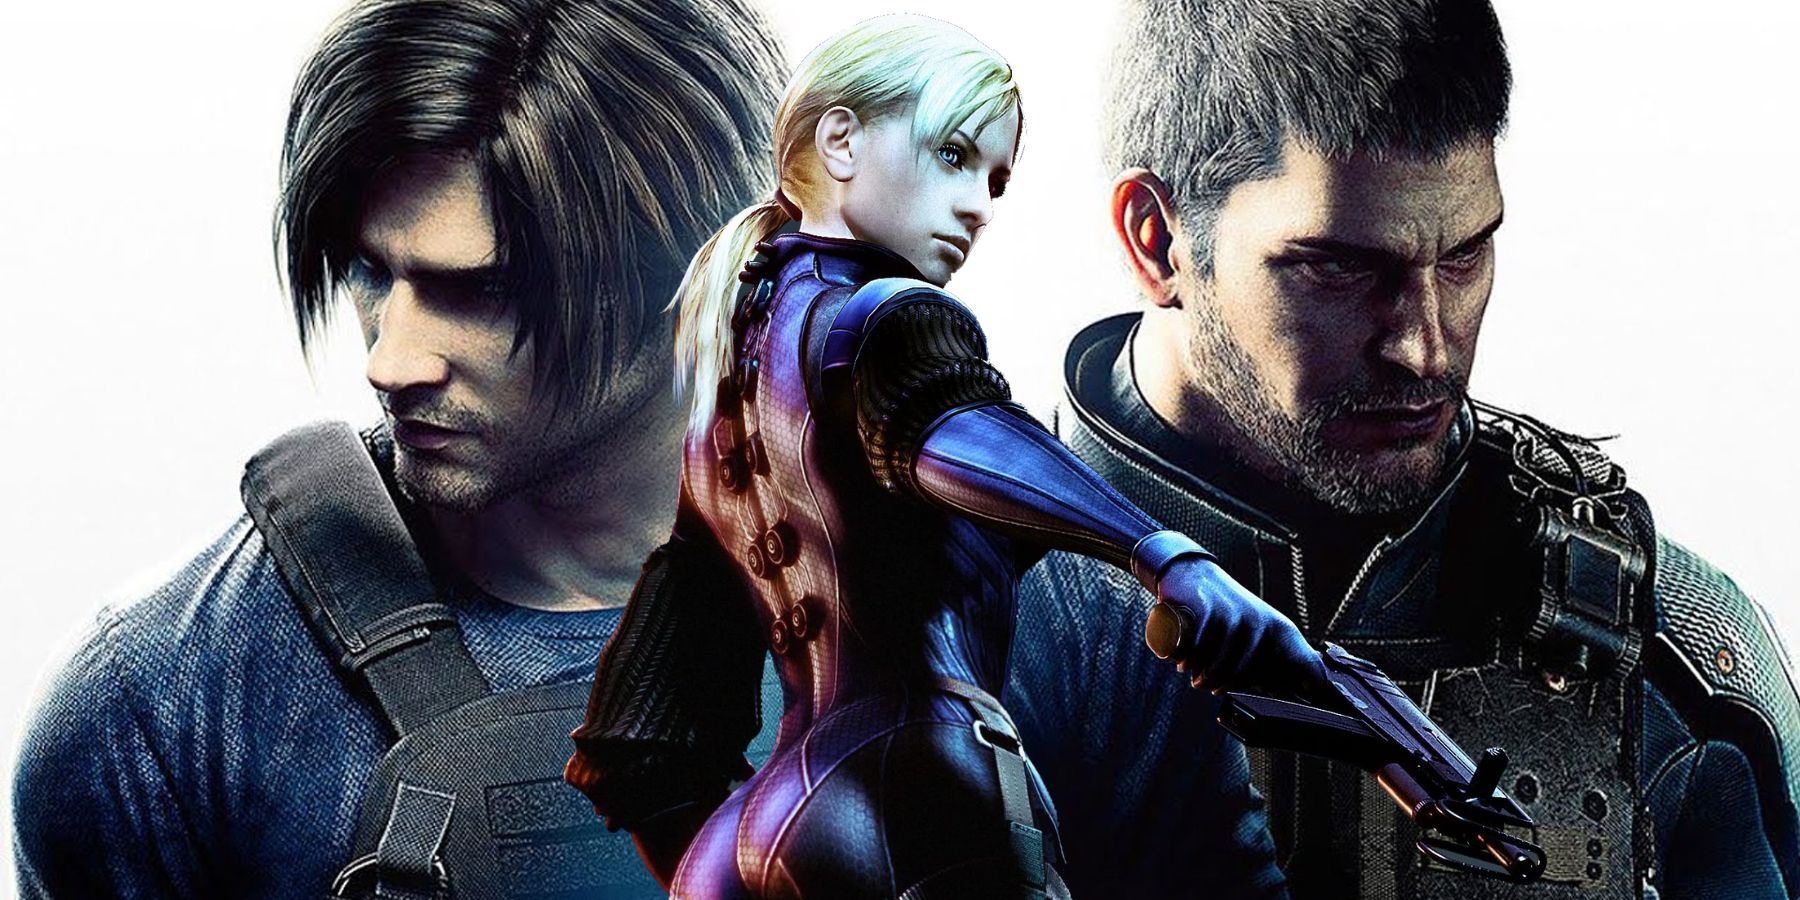 Resident Evil Death Island Explains Why Jill Valentine Doesn't